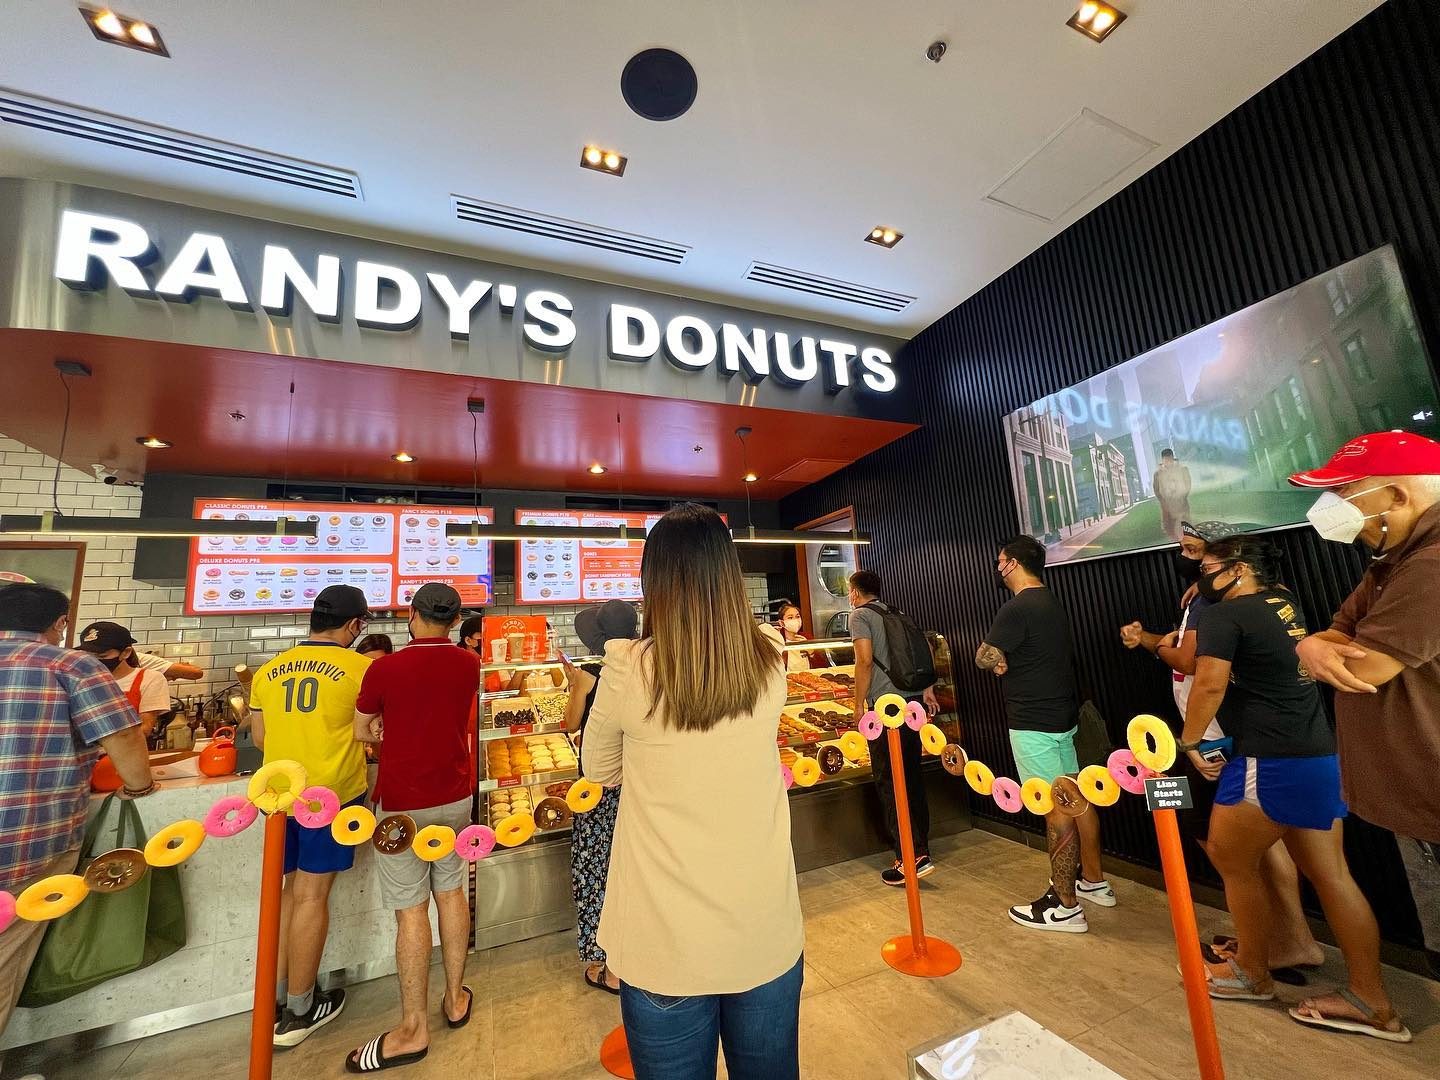 Randy’s Donuts in BGC to temporarily stop operations